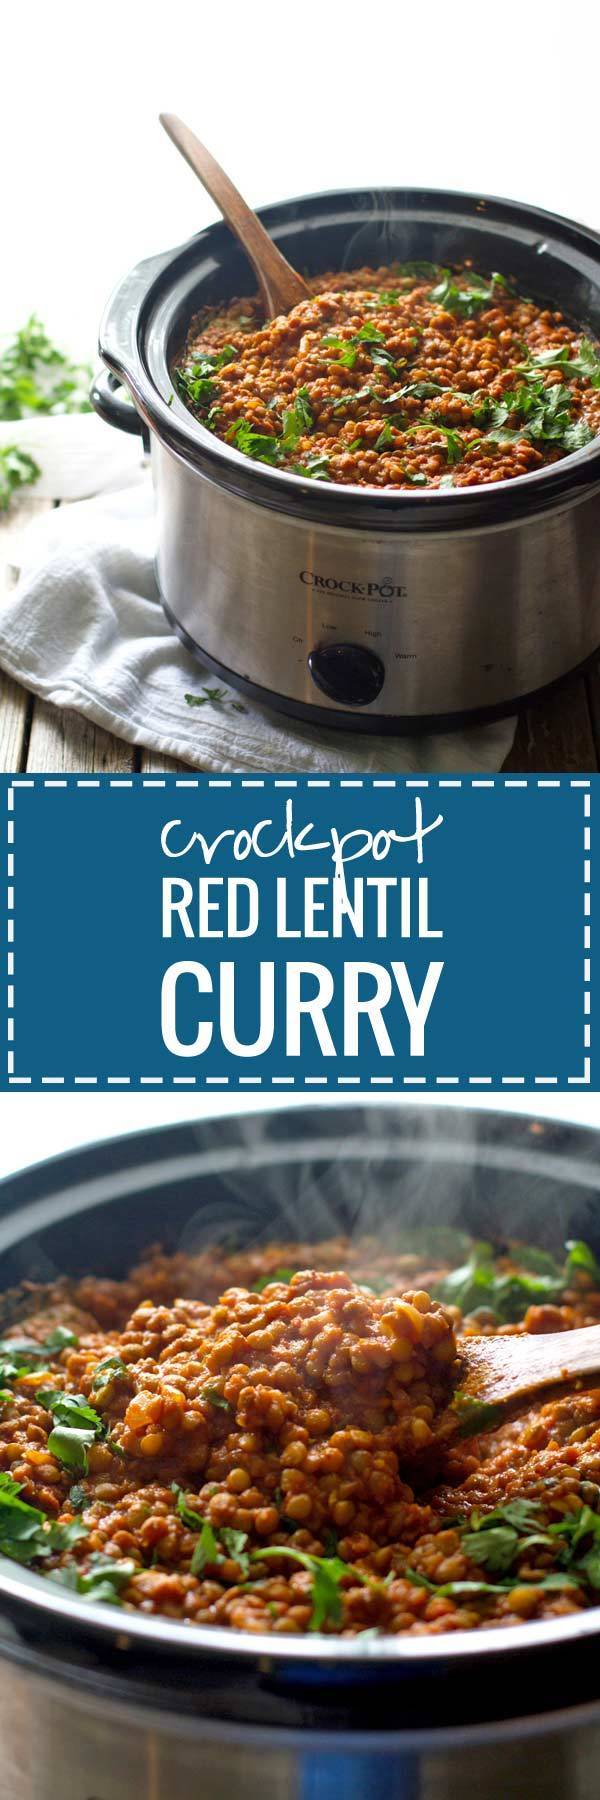 Red lentil curry is one of my favorites! This version is so simple - just toss everything in the crockpot. Easy, healthy, and full of flavor.